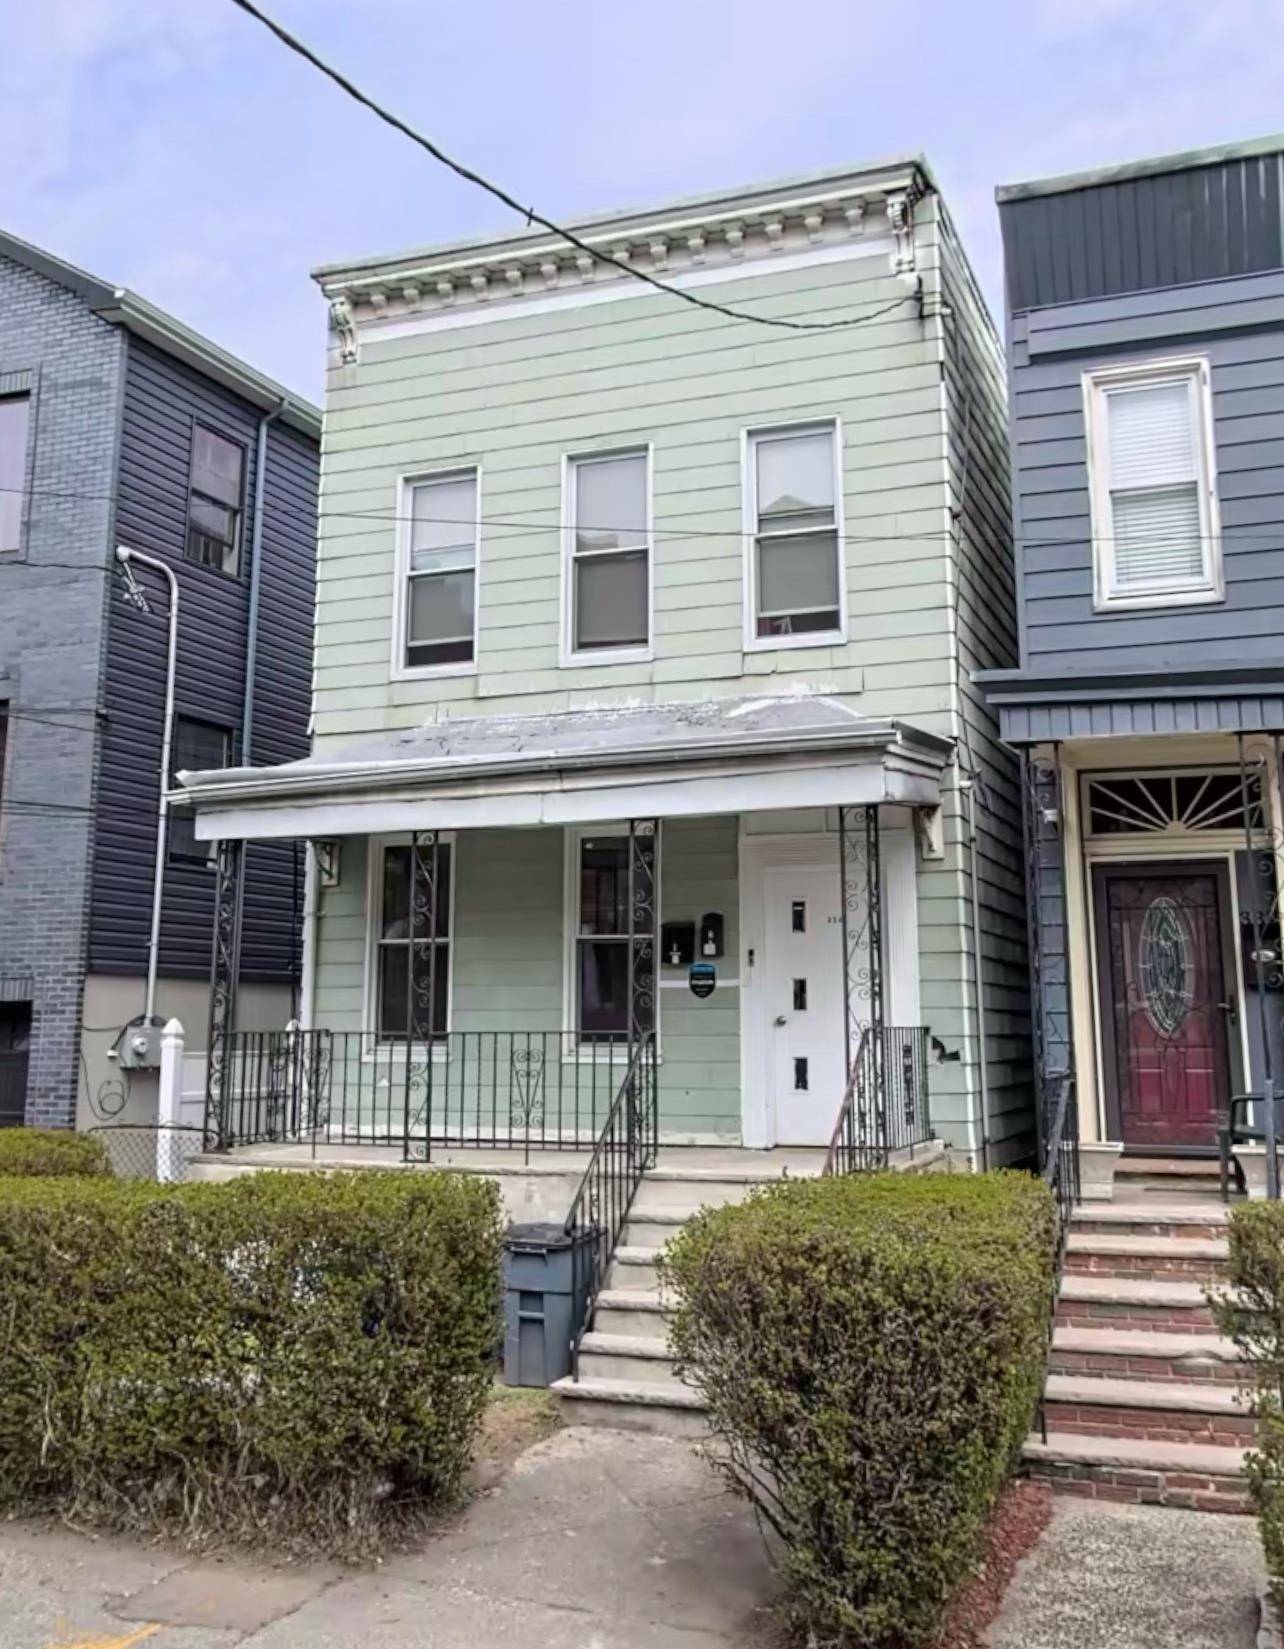 334 FORREST ST Multi-Family New Jersey